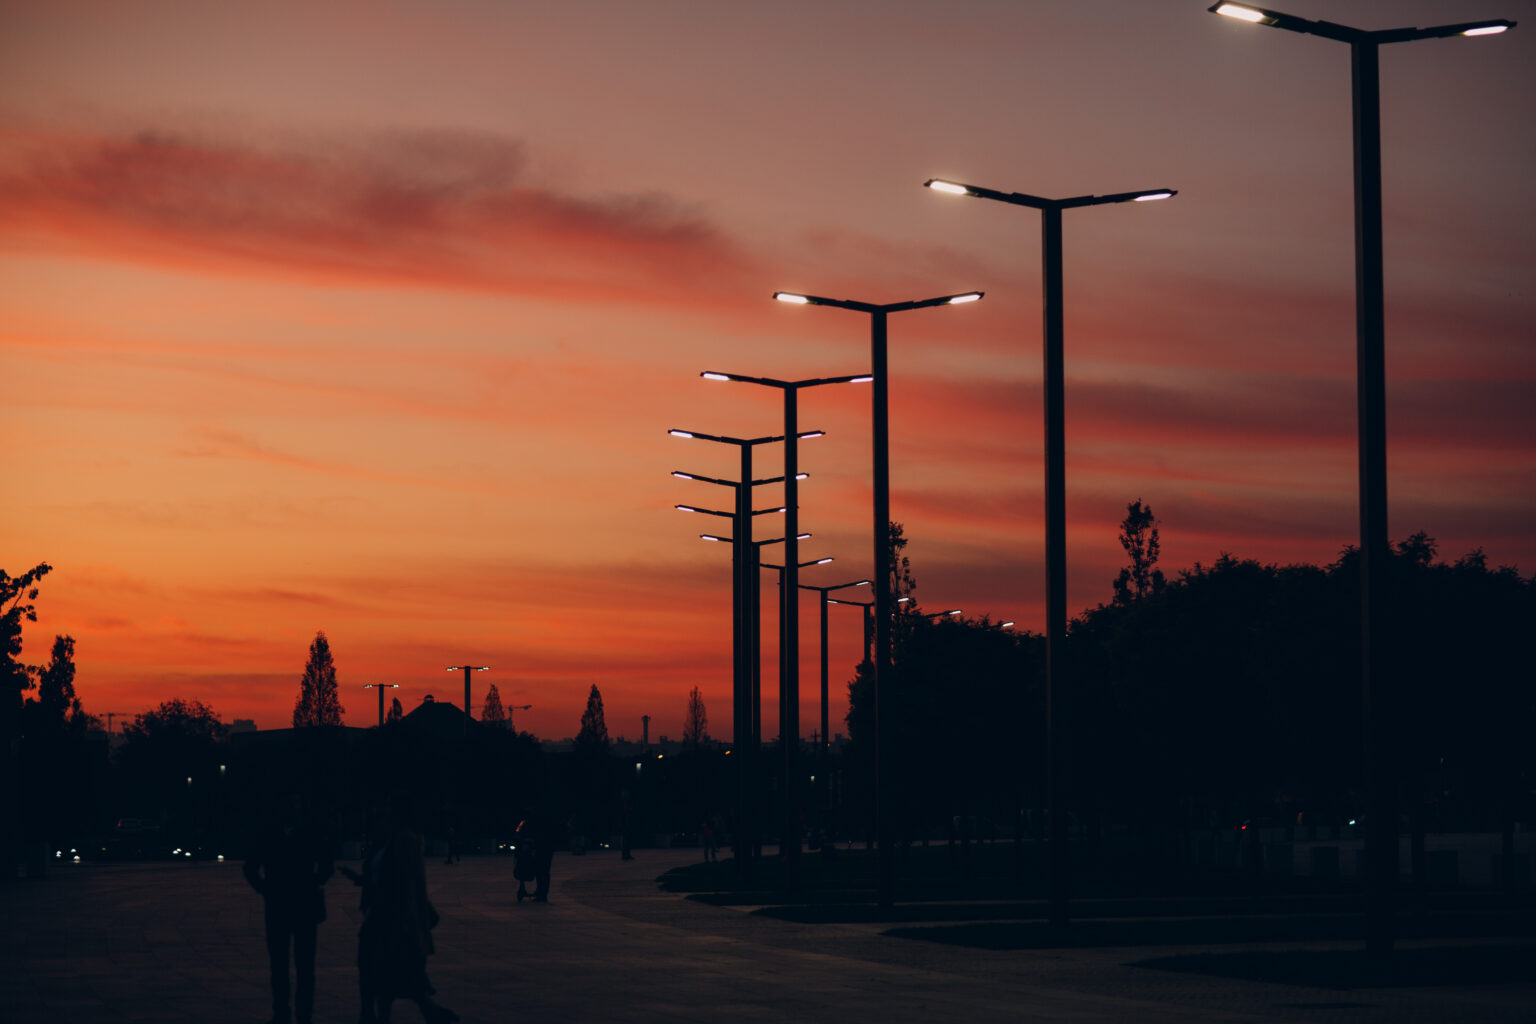 LED street lights in the evening on a sunset background